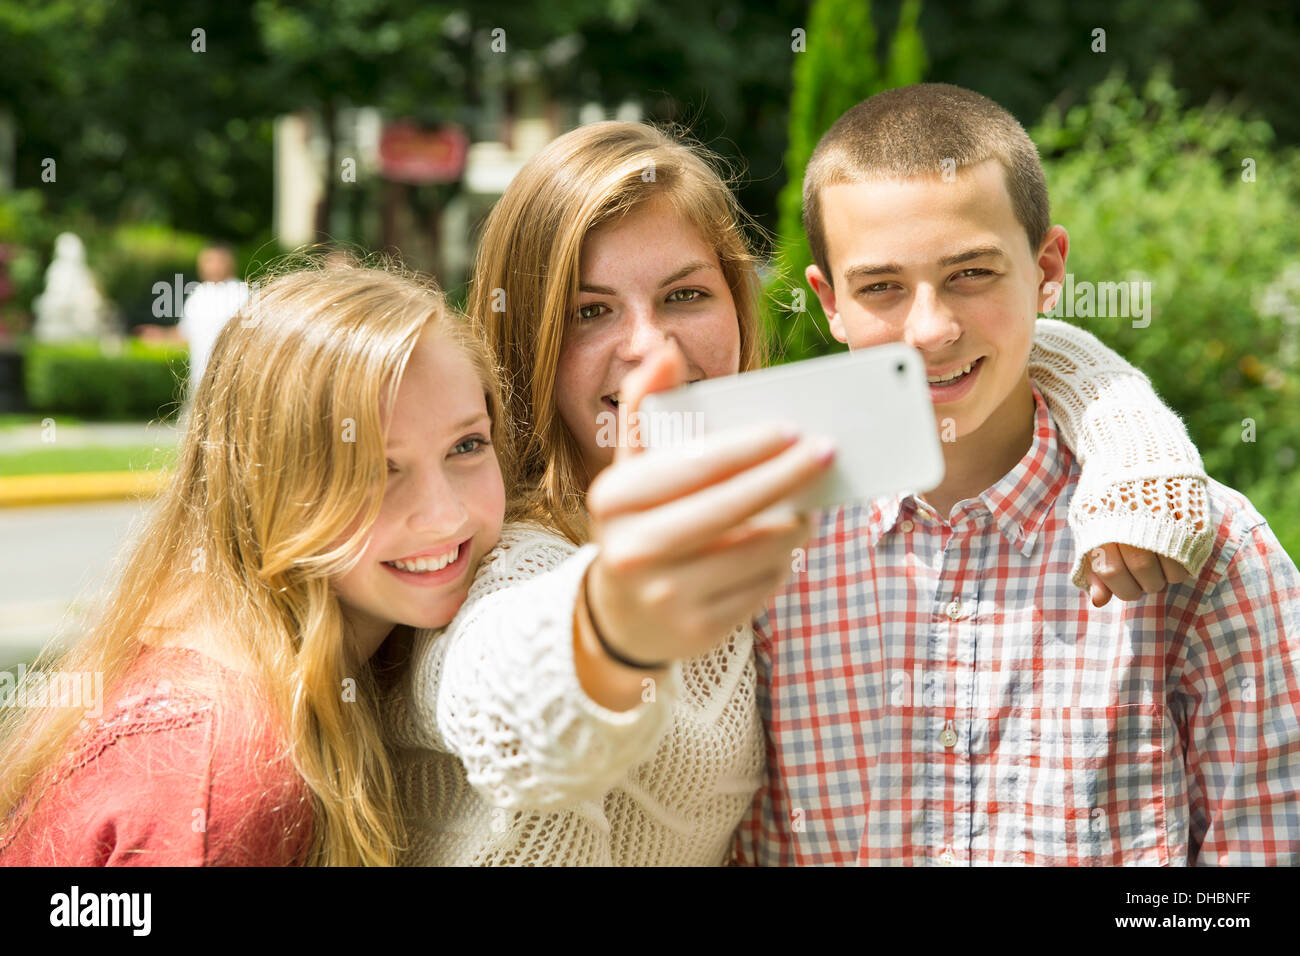 Three young people, two girls and a boy, posing and taking selfy photographs. Stock Photo